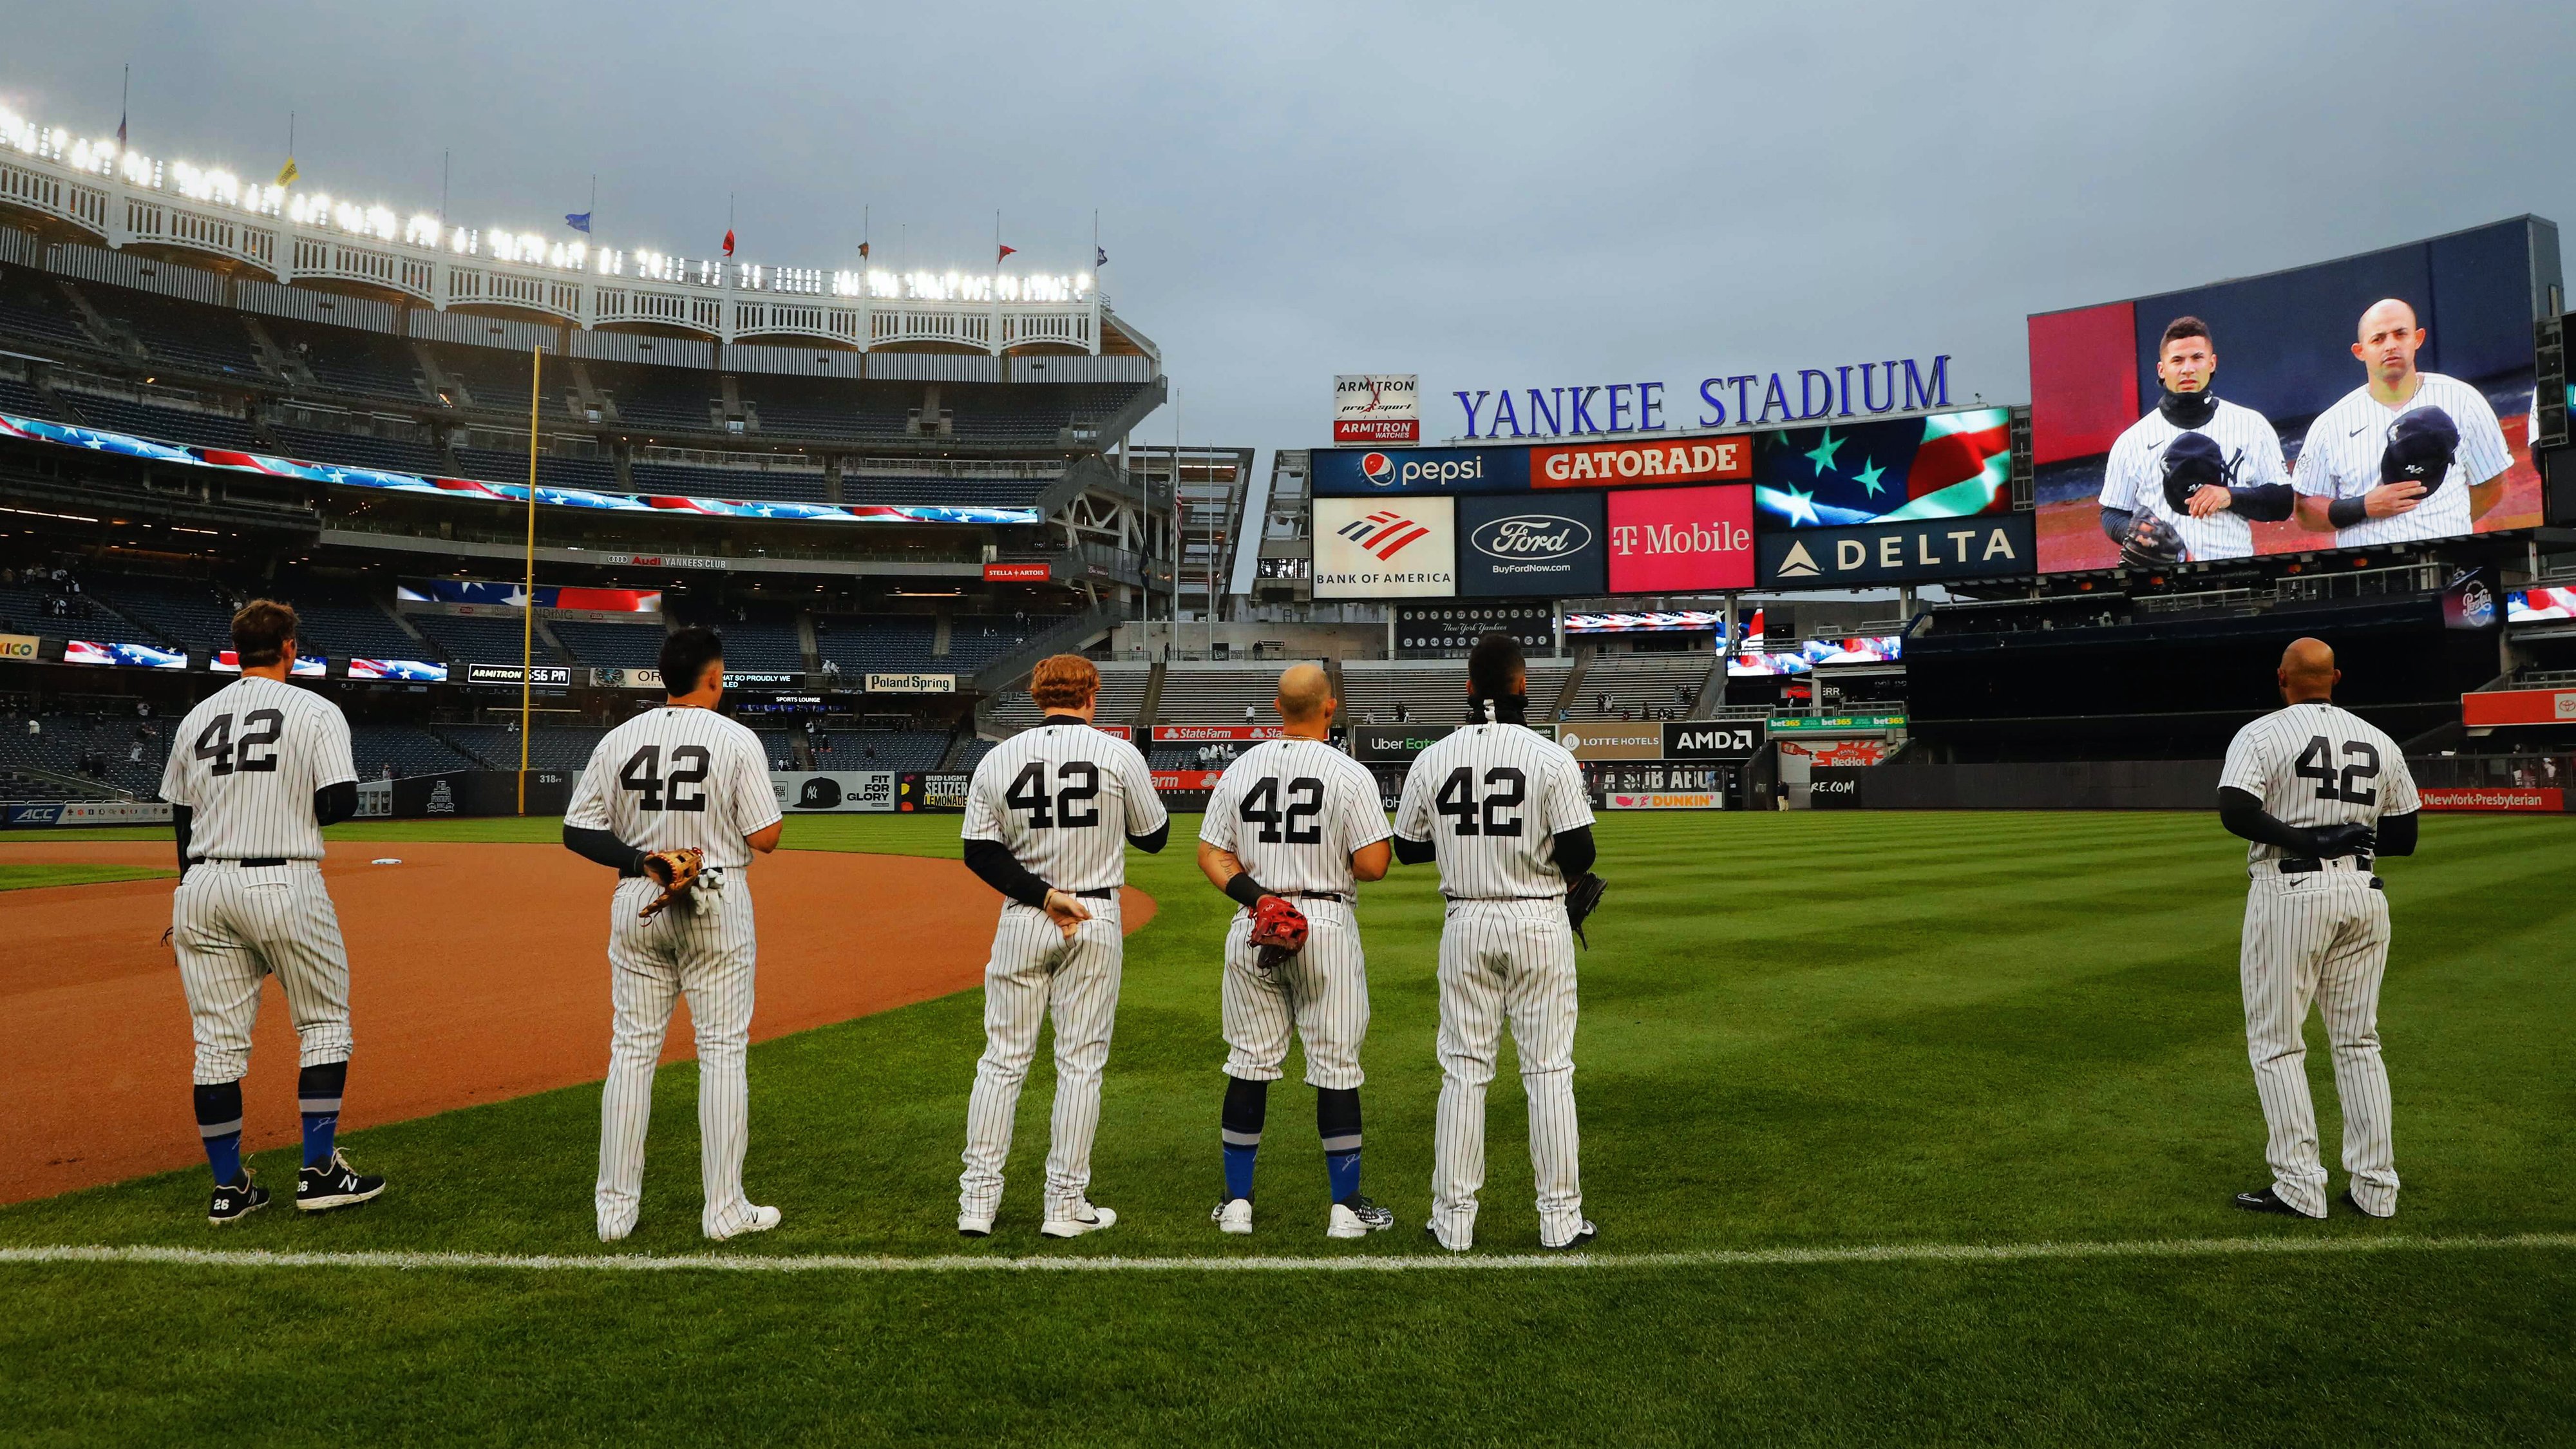 New York Yankees on X: 74 years ago yesterday, on April 15, 1947, Jackie  Robinson broke baseball's color barrier with his historic MLB debut. We  proudly wear 42 to honor Jackie and